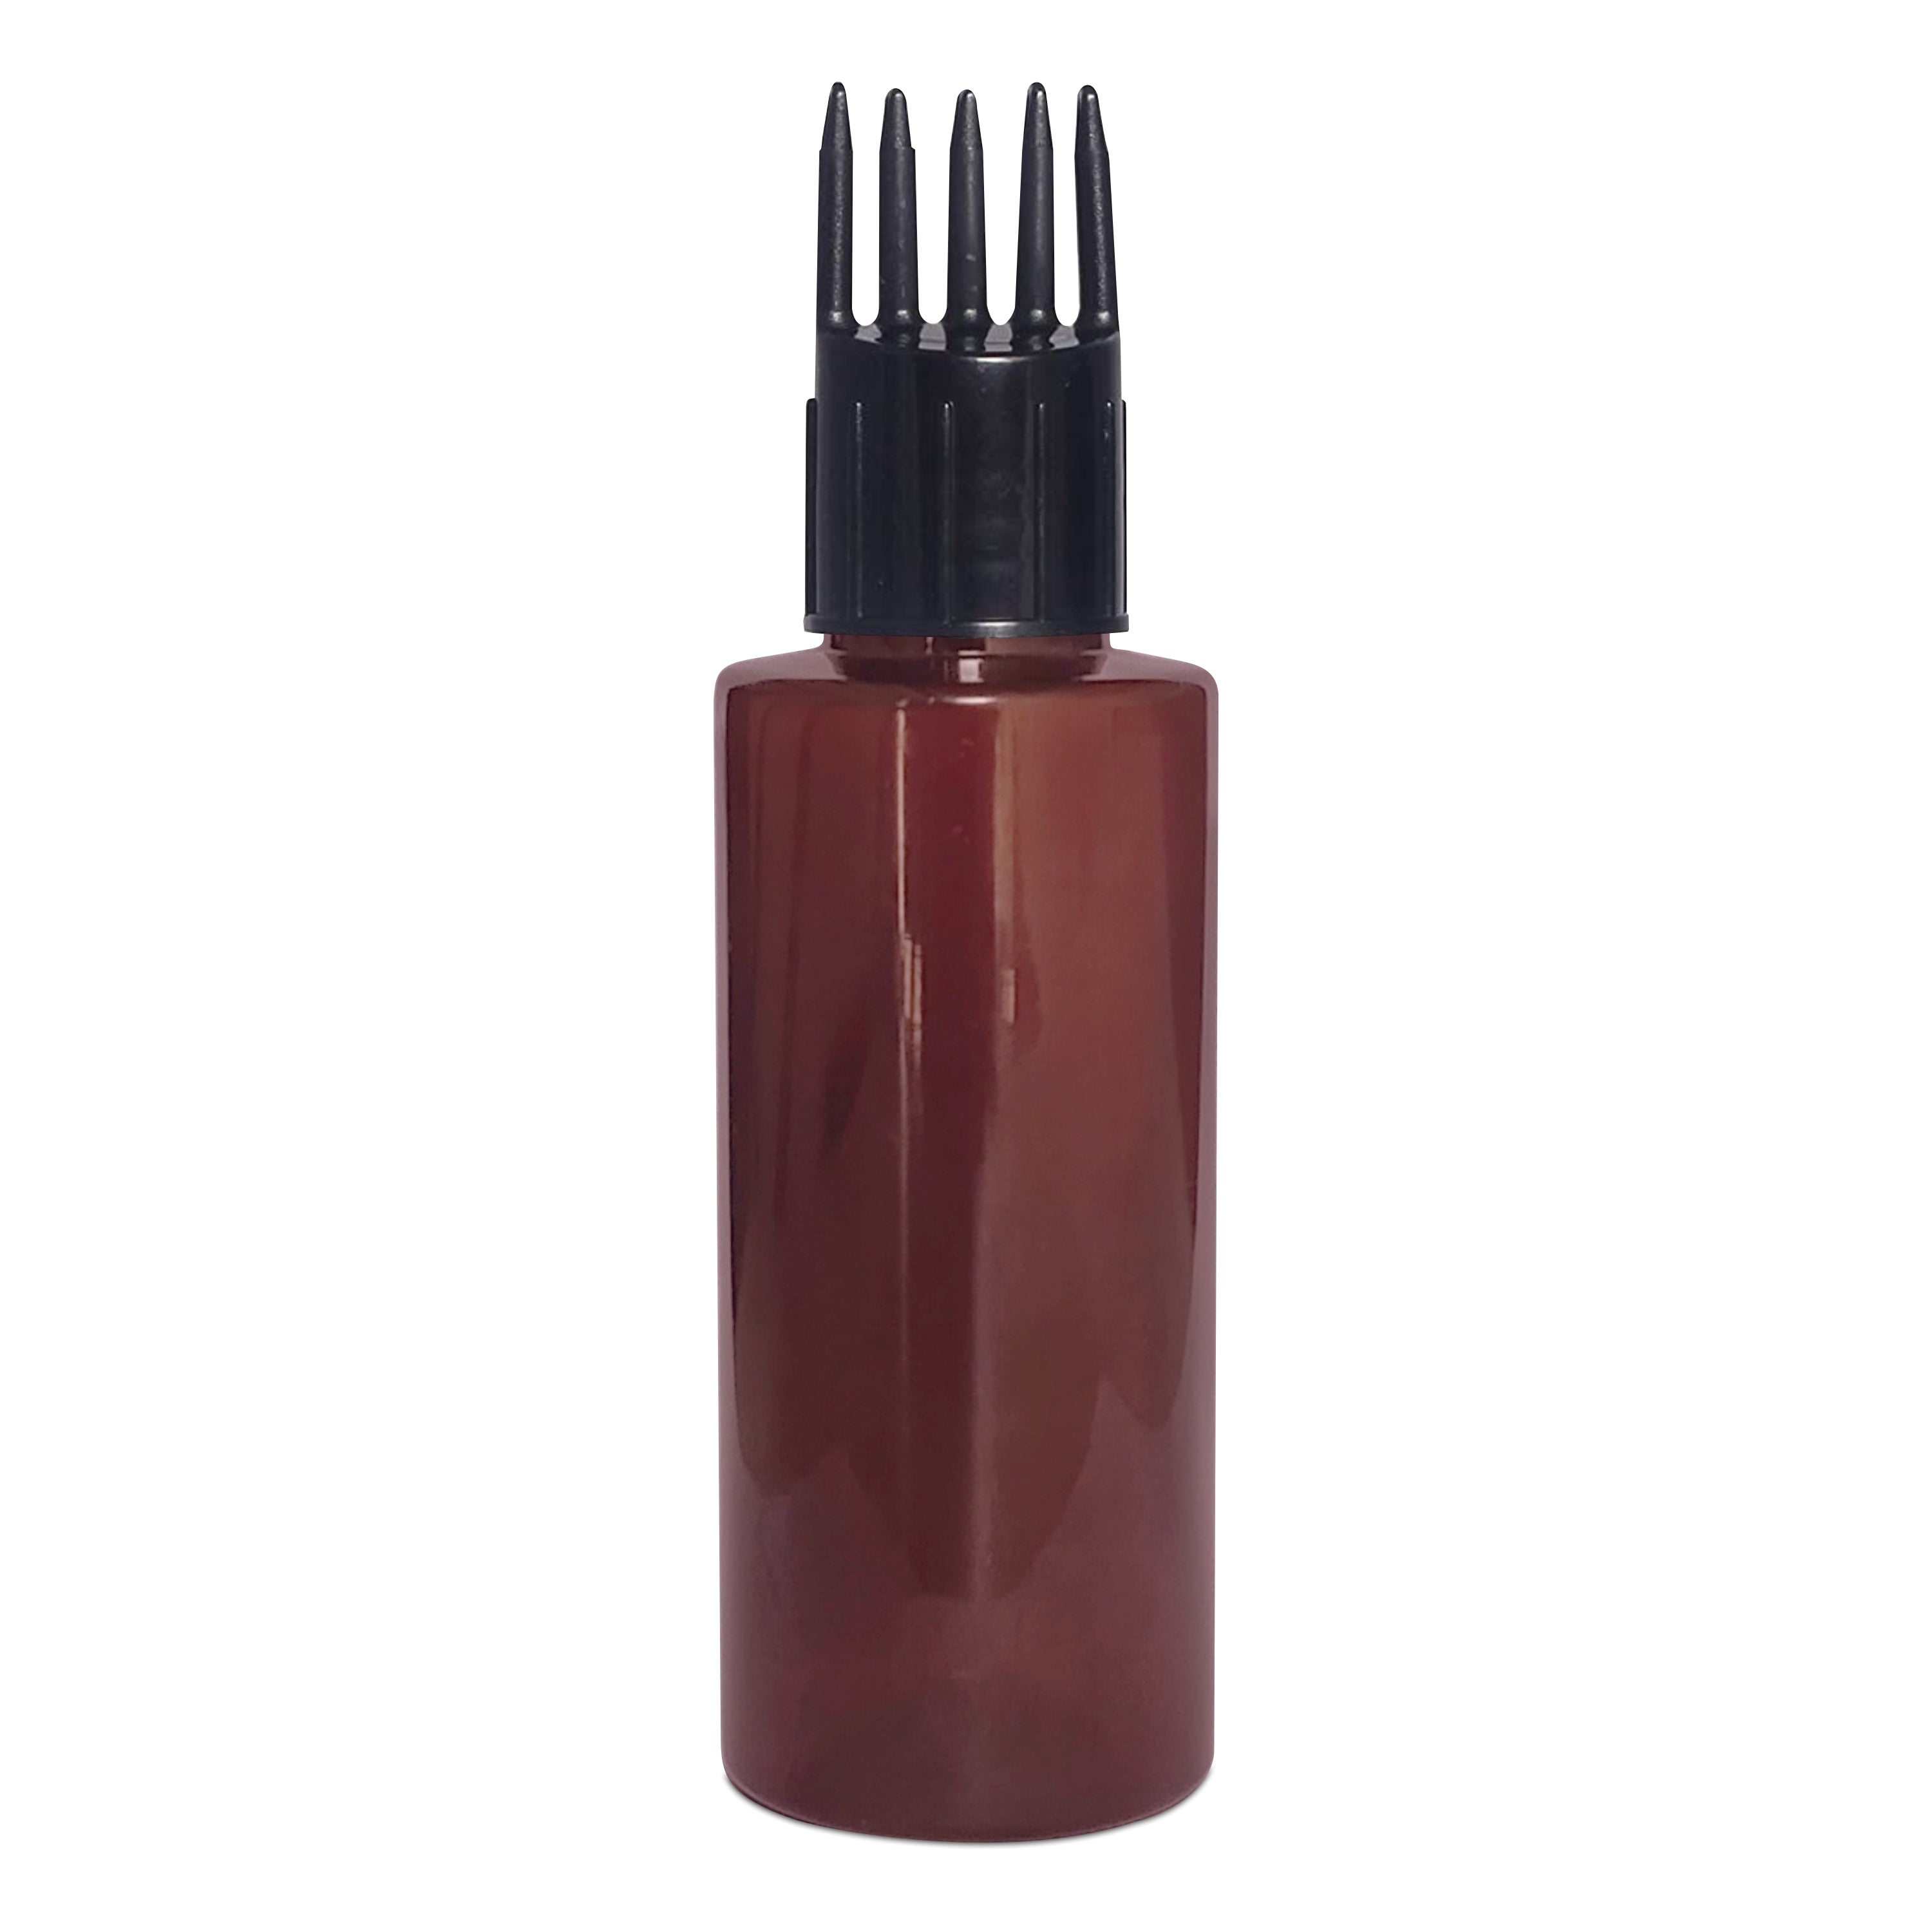 ZMA26| AMBER COLOR BOTTLE WITH BLACK APPLICATOR CAP Available Size: 50ml, 100ml & 200ml